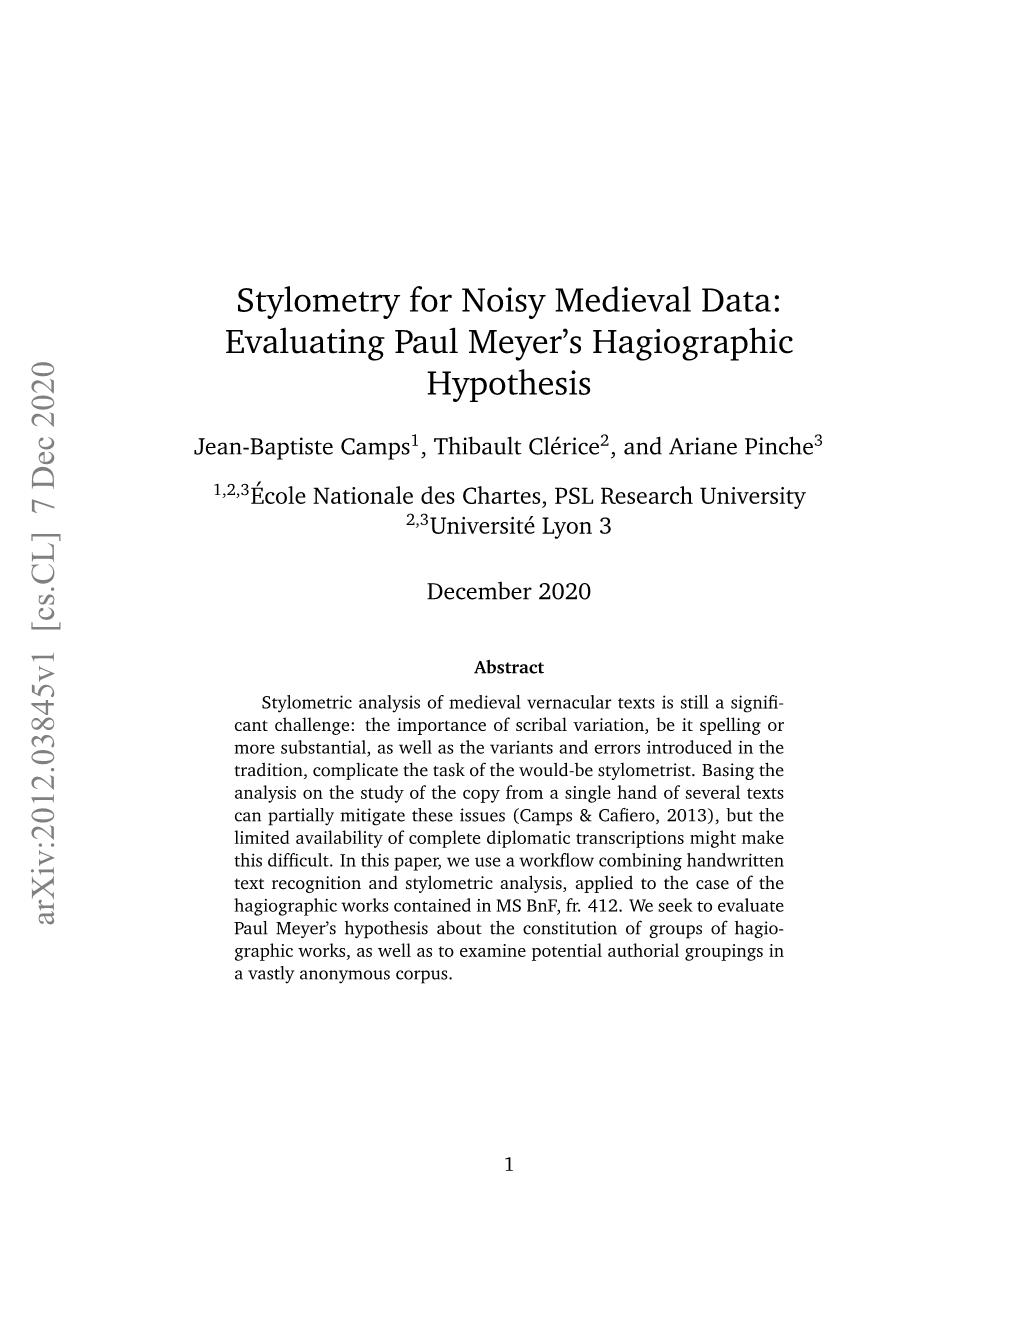 Evaluating Paul Meyer's Hagiographic Hypothesis